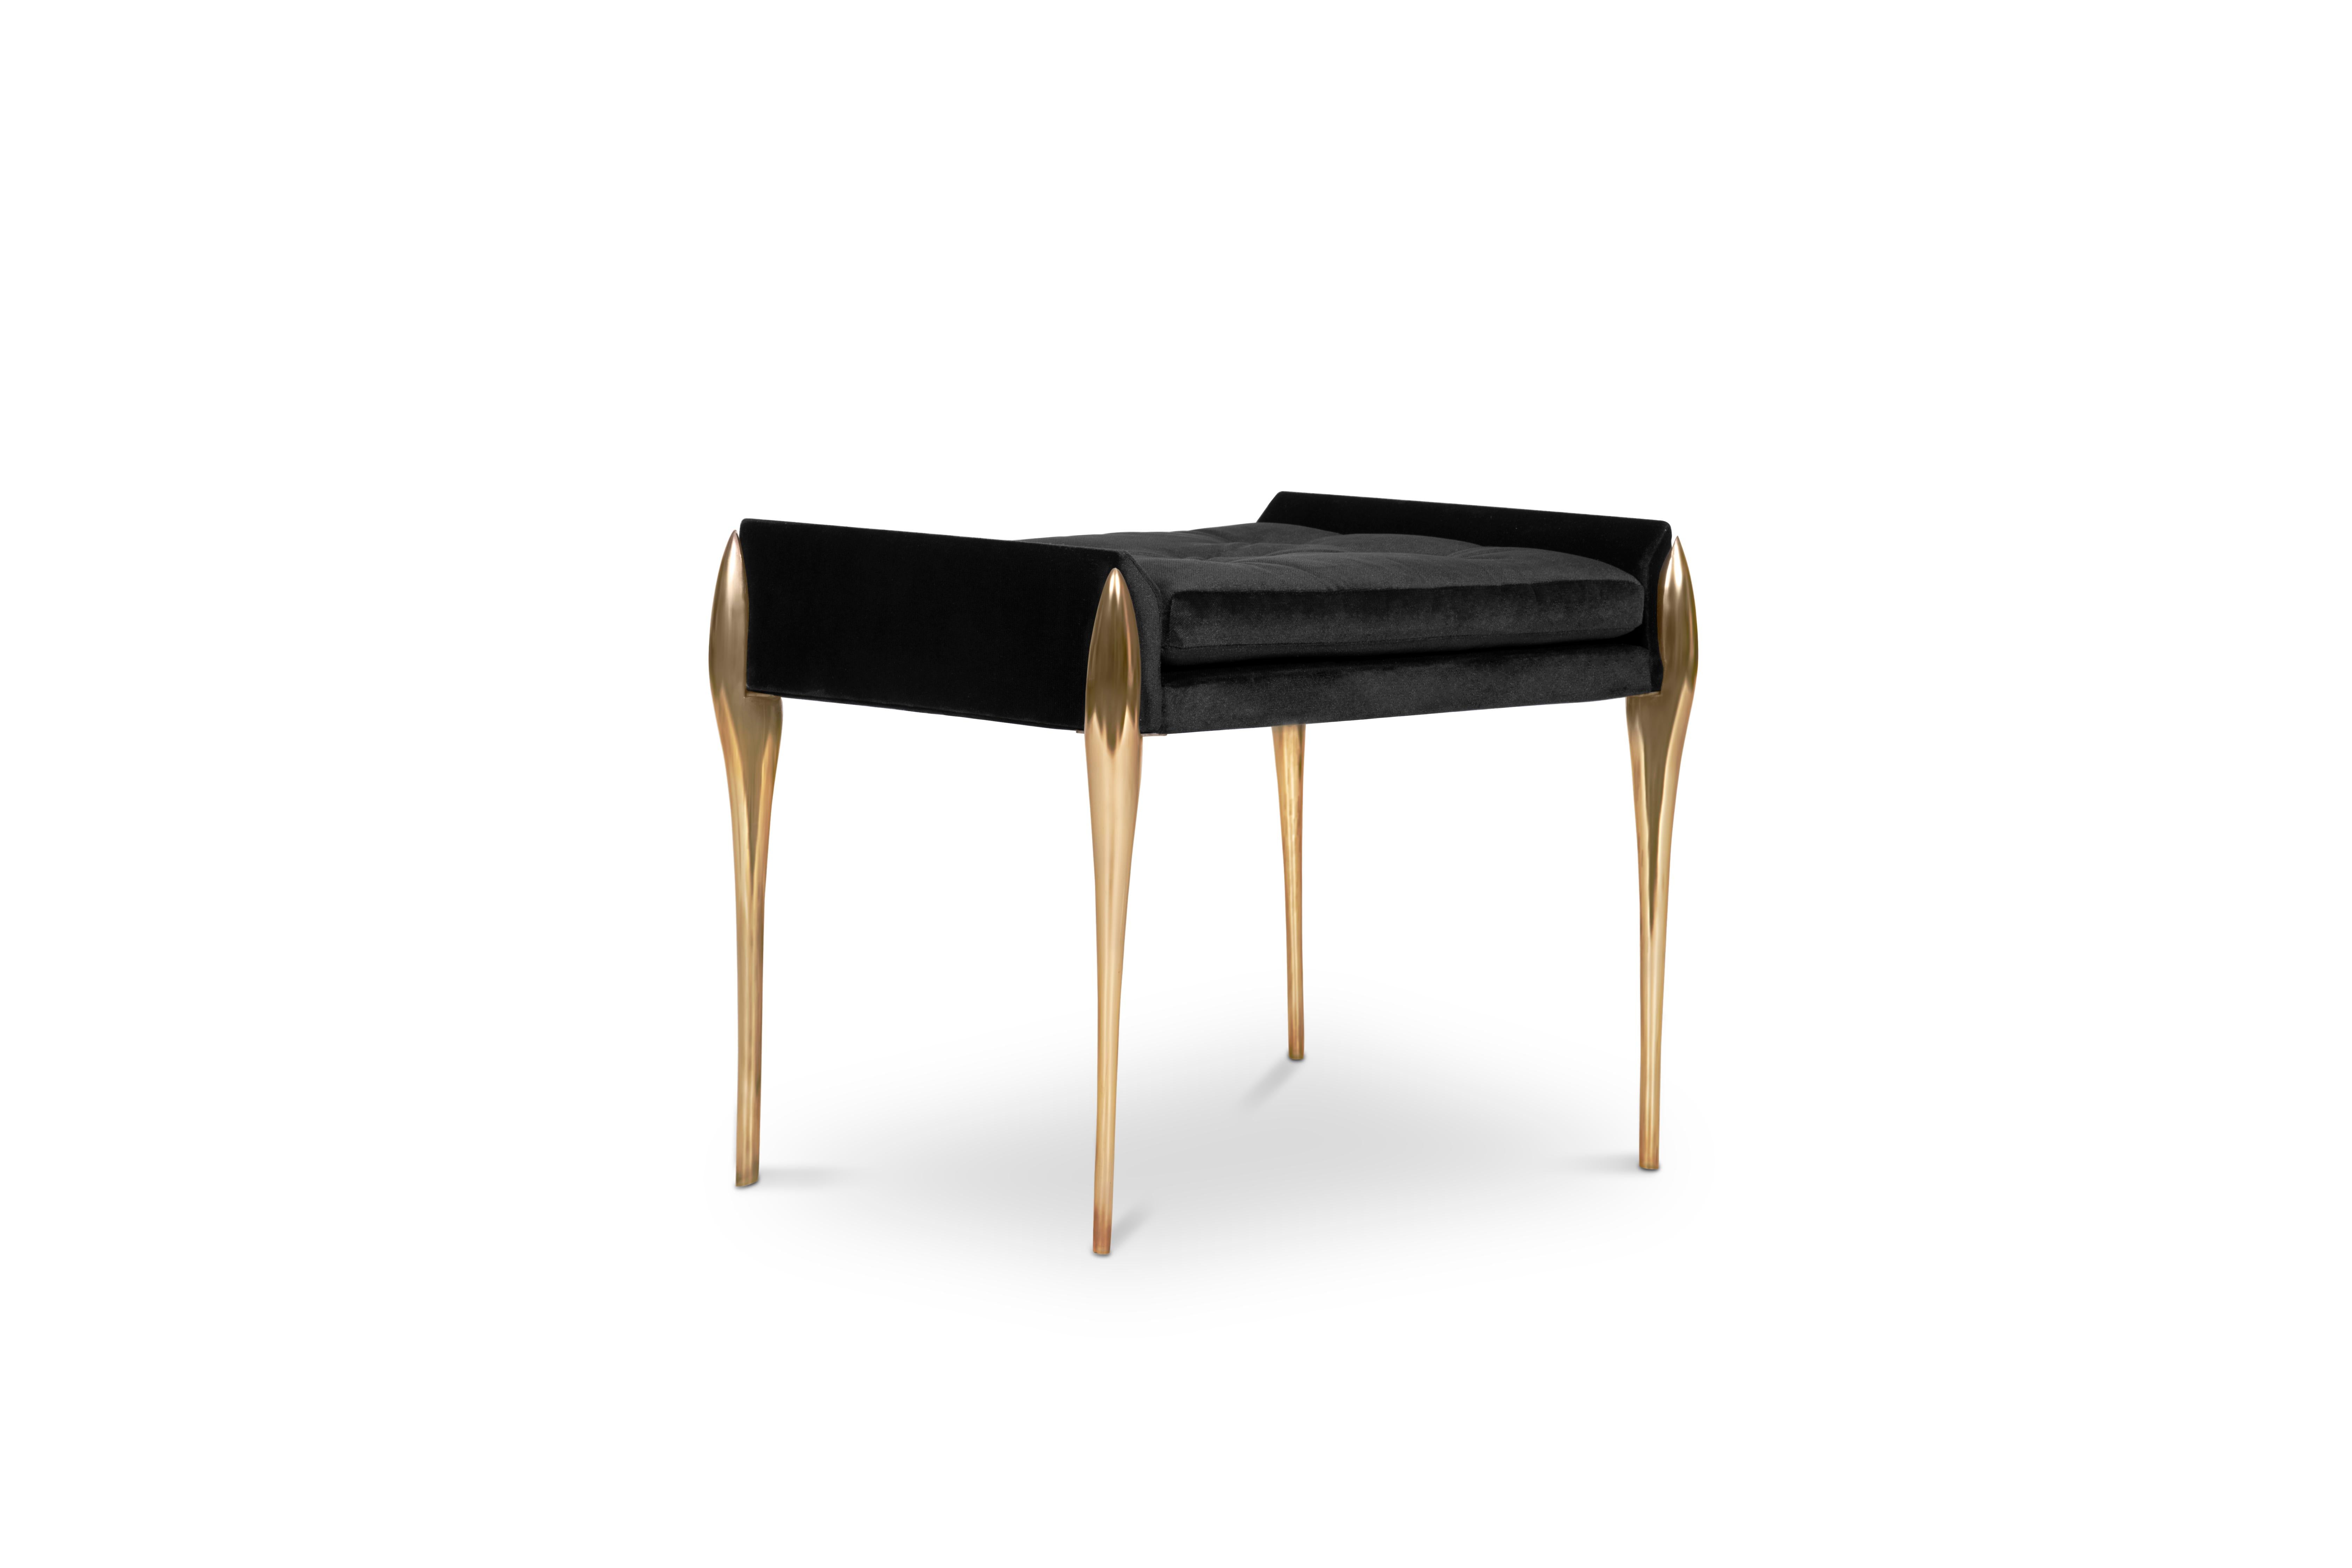 Stiletto is a button tufted bench upholstered in velvet. It features brass stiletto legs that are inspired by high heels, providing a sharp and sleek look to your bathroom. It has a rectangular cushioned pad accented by little sloping arms. Feminine